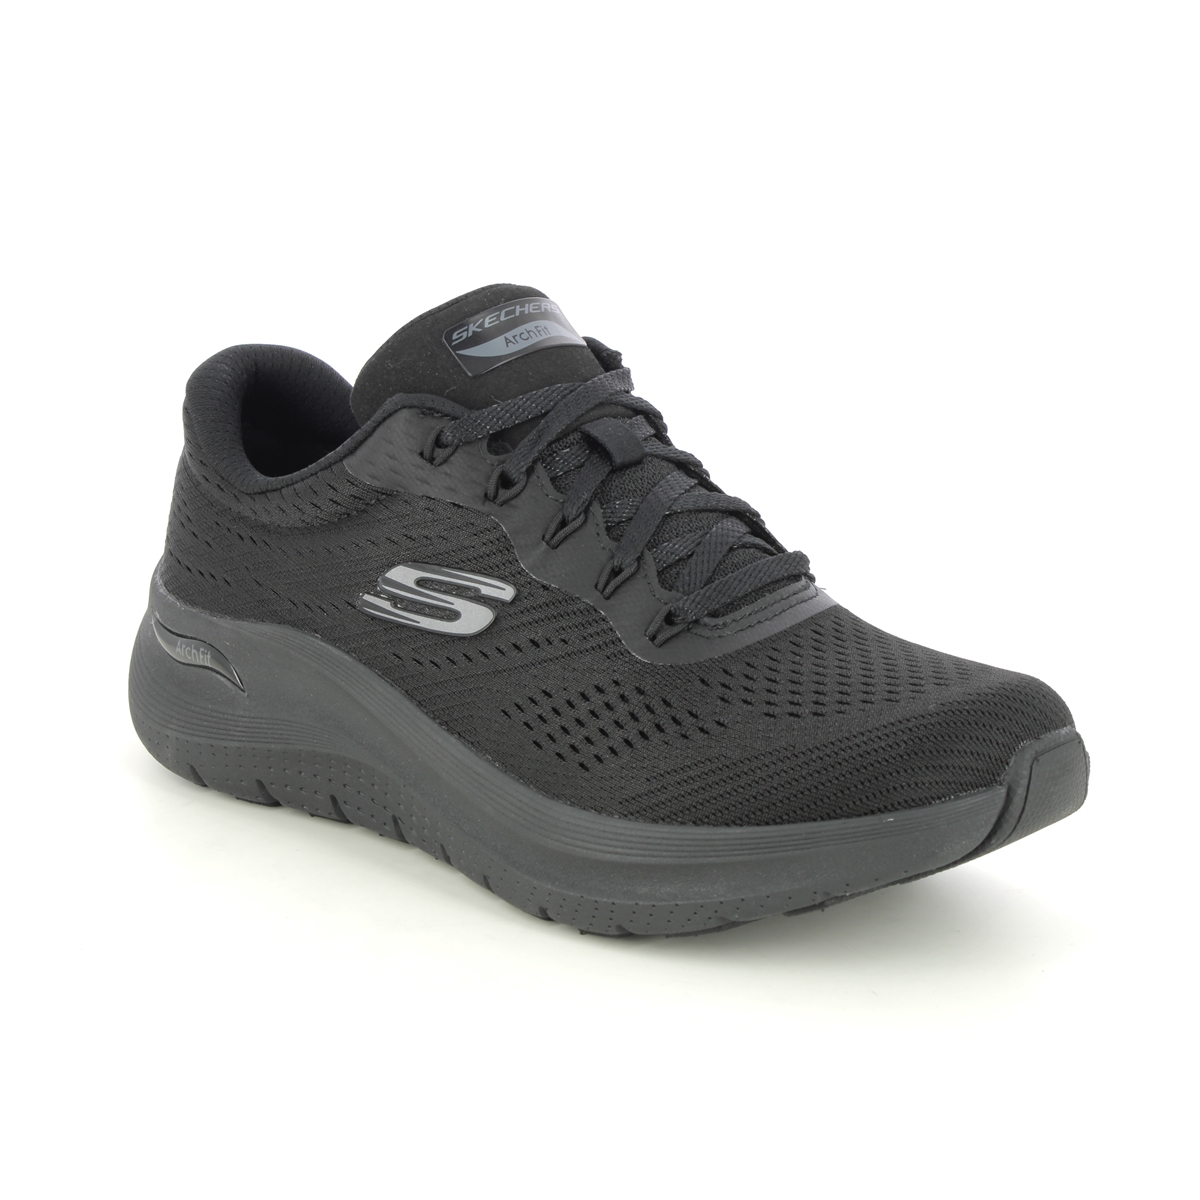 Skechers Arch Fit 2 Lace BBK Black Womens trainers 150051 in a Plain Textile in Size 7